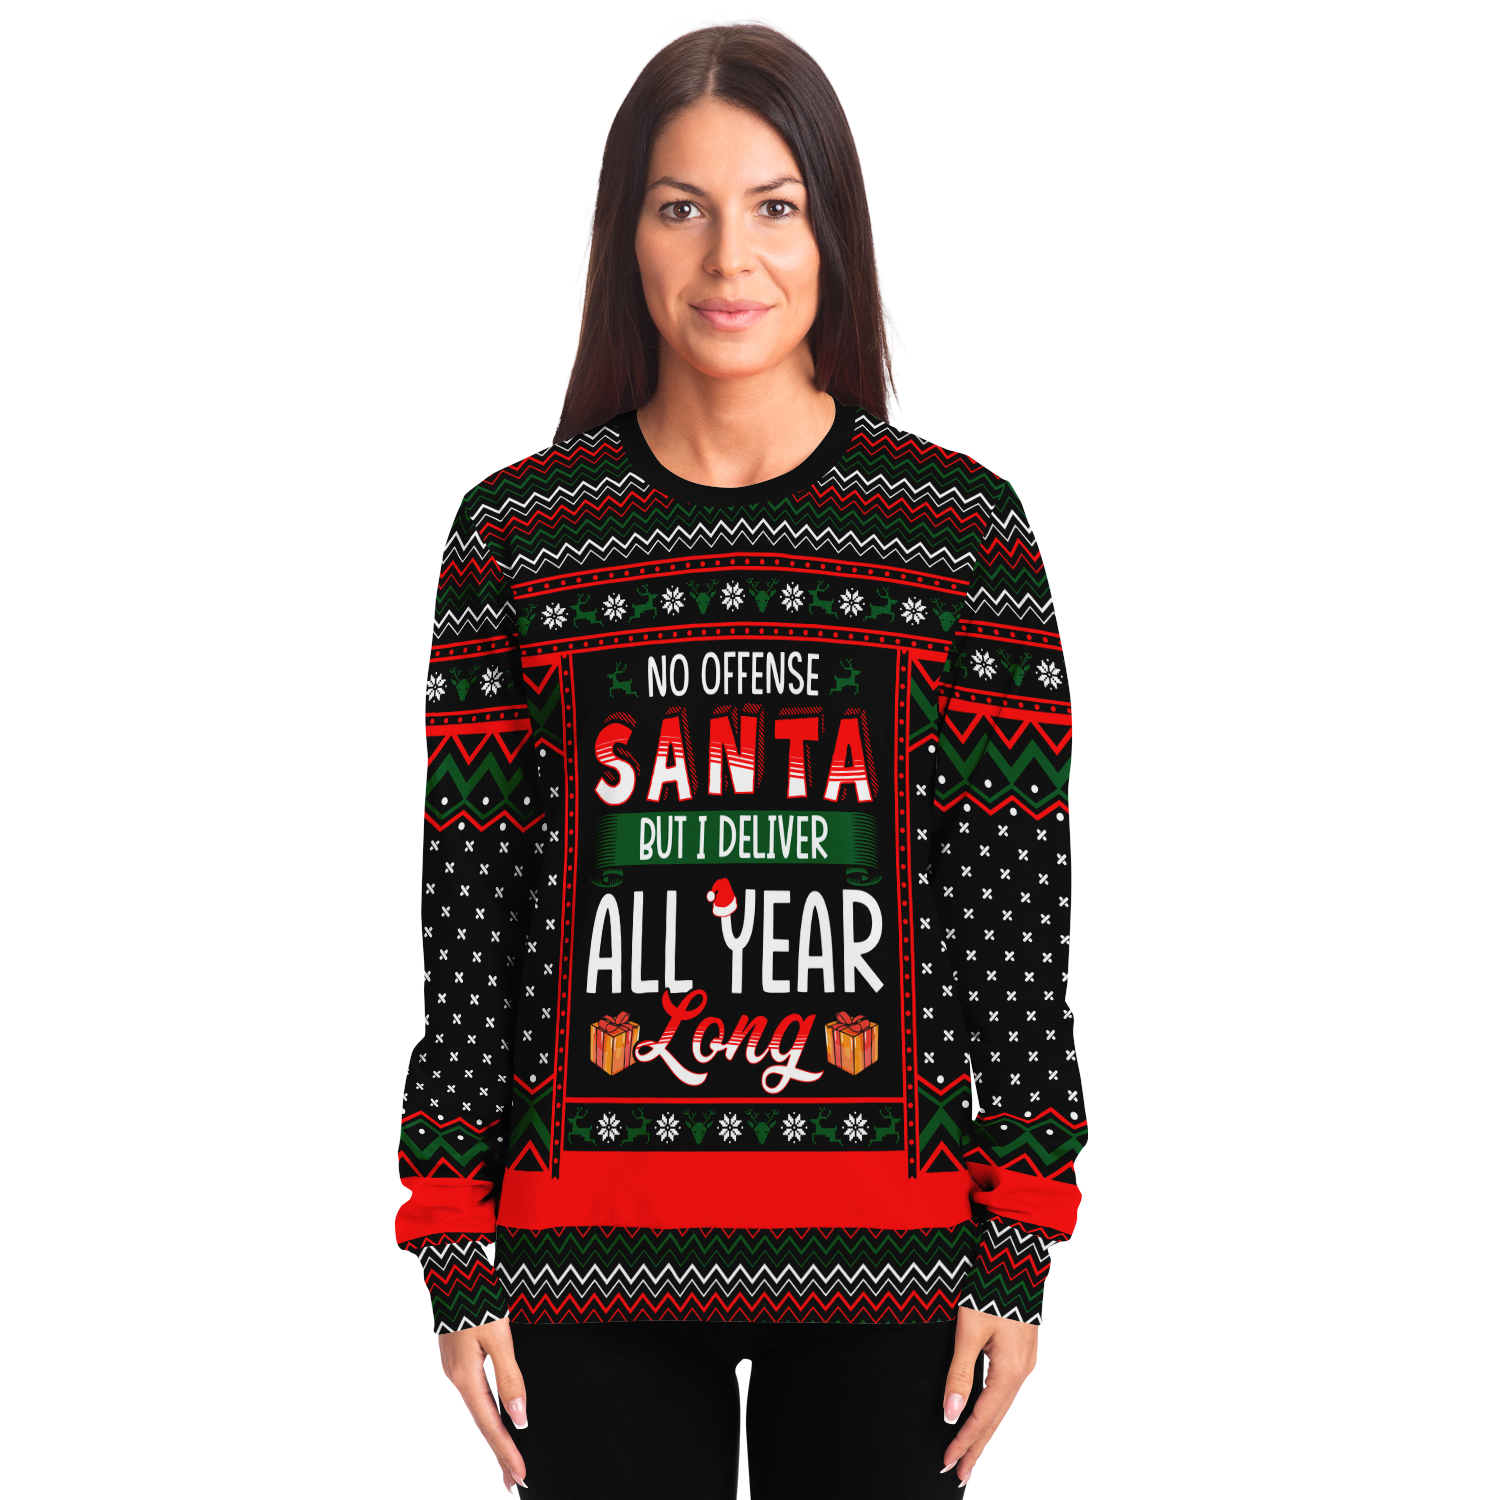 I Deliver All Year Long Christmas Sweatshirt | Unisex Ugly Christmas Sweater, Xmas Sweater, Holiday Sweater, Festive Sweater, Funny Redhead Sweater, Funny Party Shirt